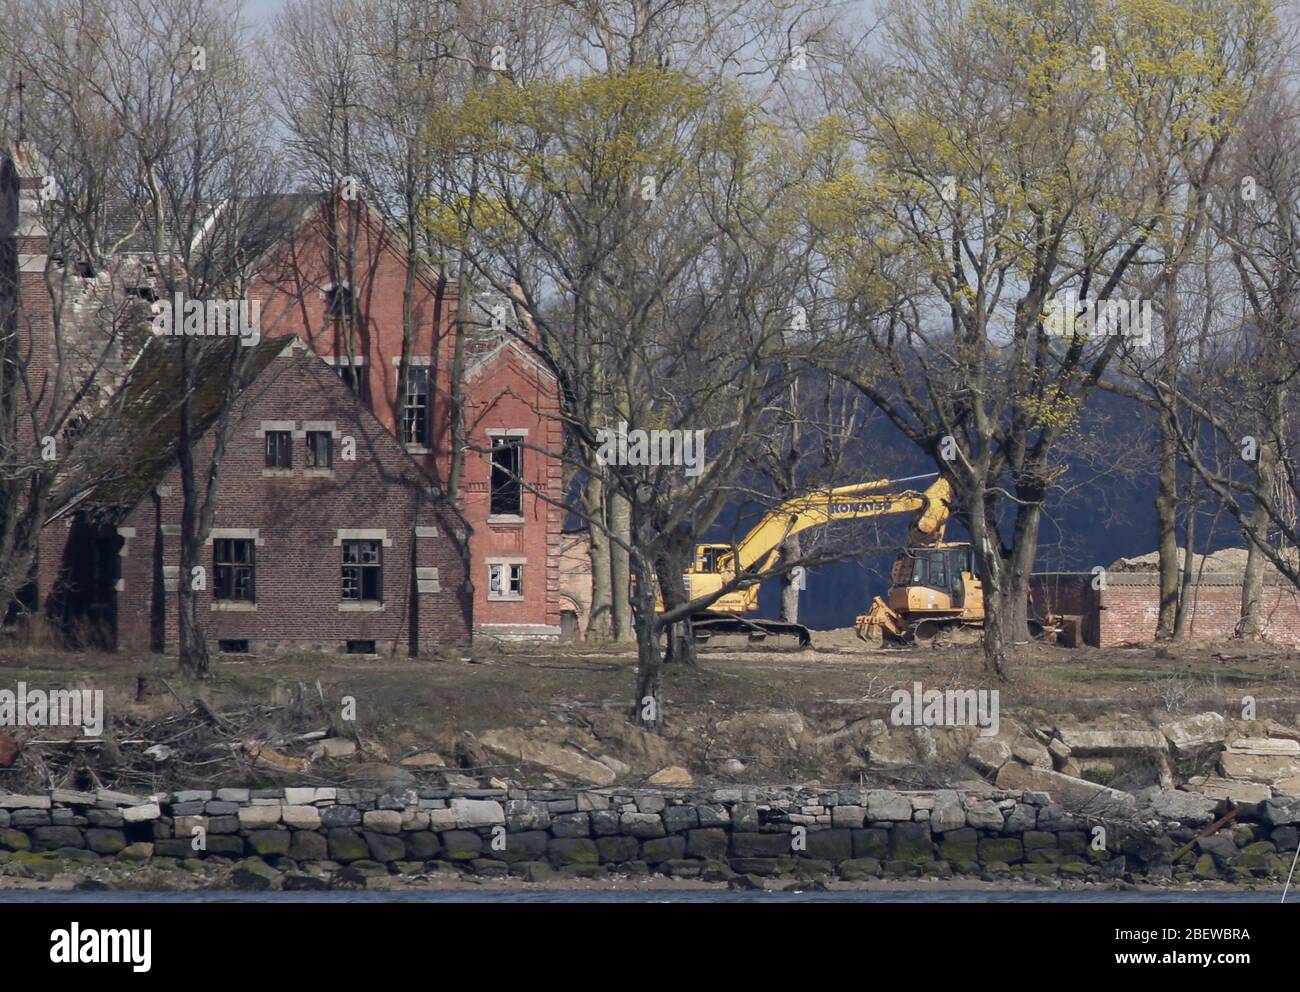 New York, United States. 15th Apr, 2020. A backhoe is parked on Hart Island in New York City on Wednesday, April 15, 2020. For almost two centuries, New York City has used Hart Island as a place where unclaimed bodies can be buried and laid to rest. Due to Coronavirus burials here have increased. New York City's death count has now increased to more than 10,000. Photo by John Angelillo/UPI Credit: UPI/Alamy Live News Stock Photo